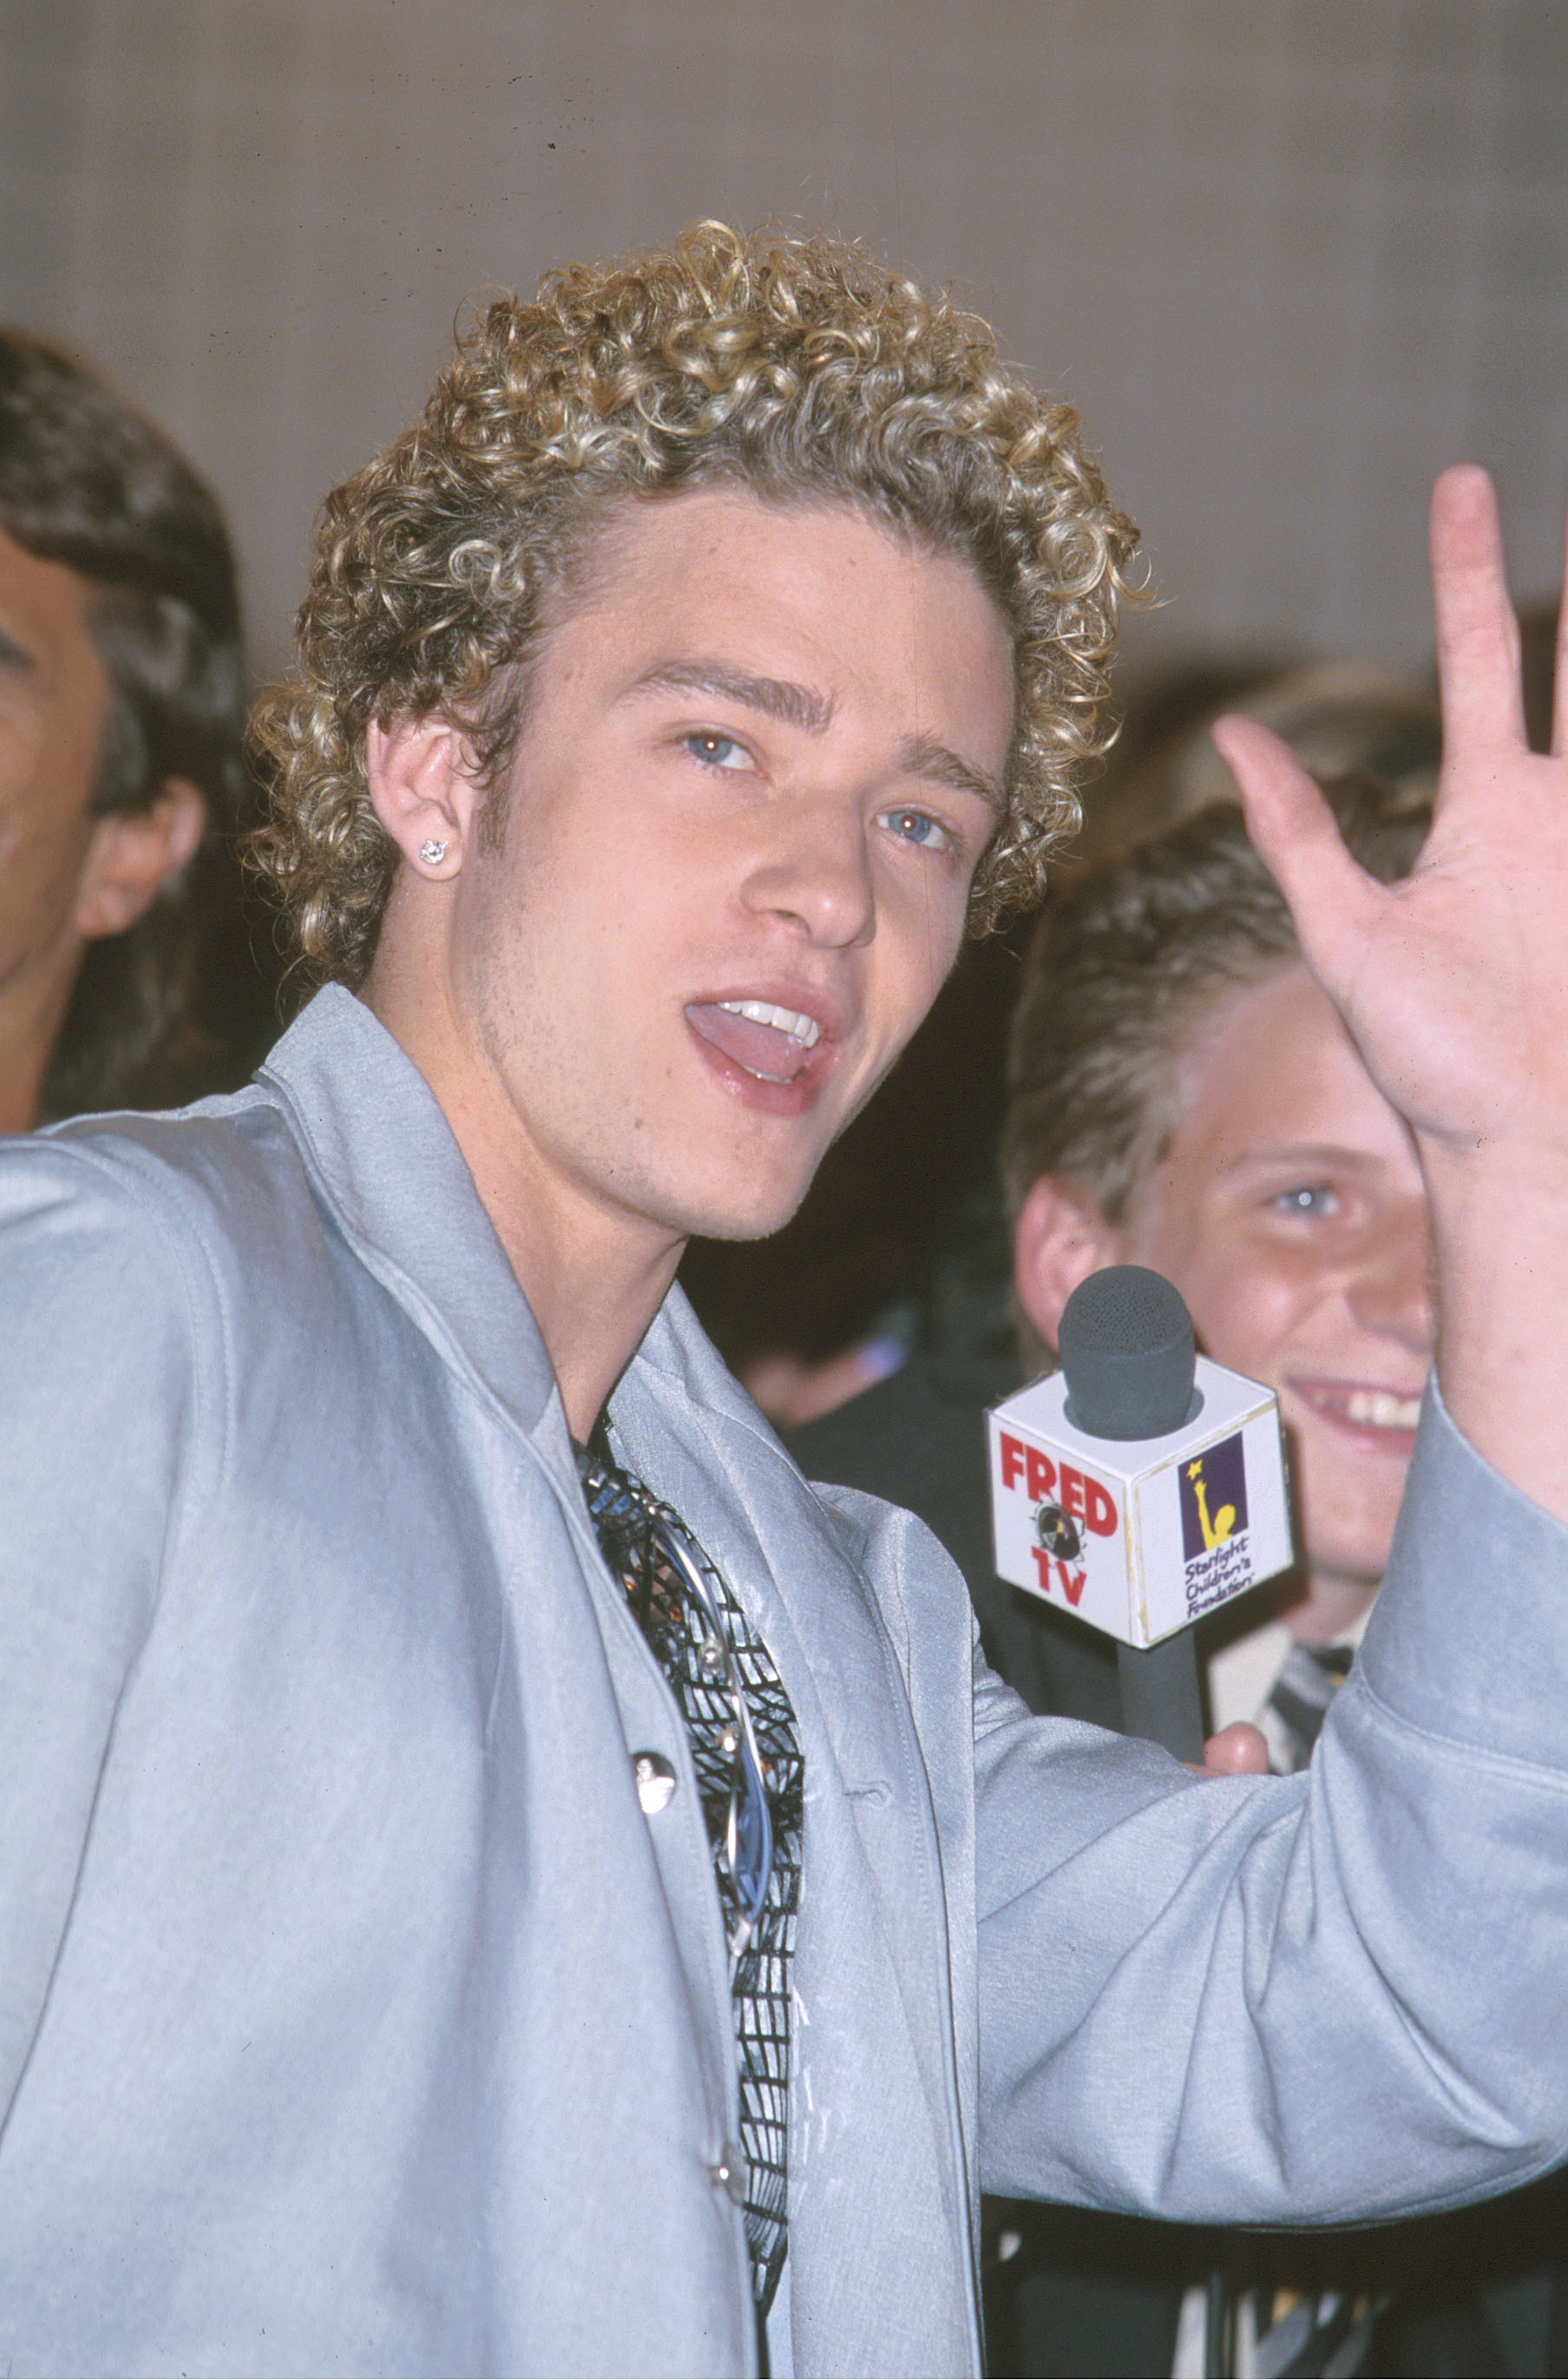 Close-up of Justin with curly hair waving